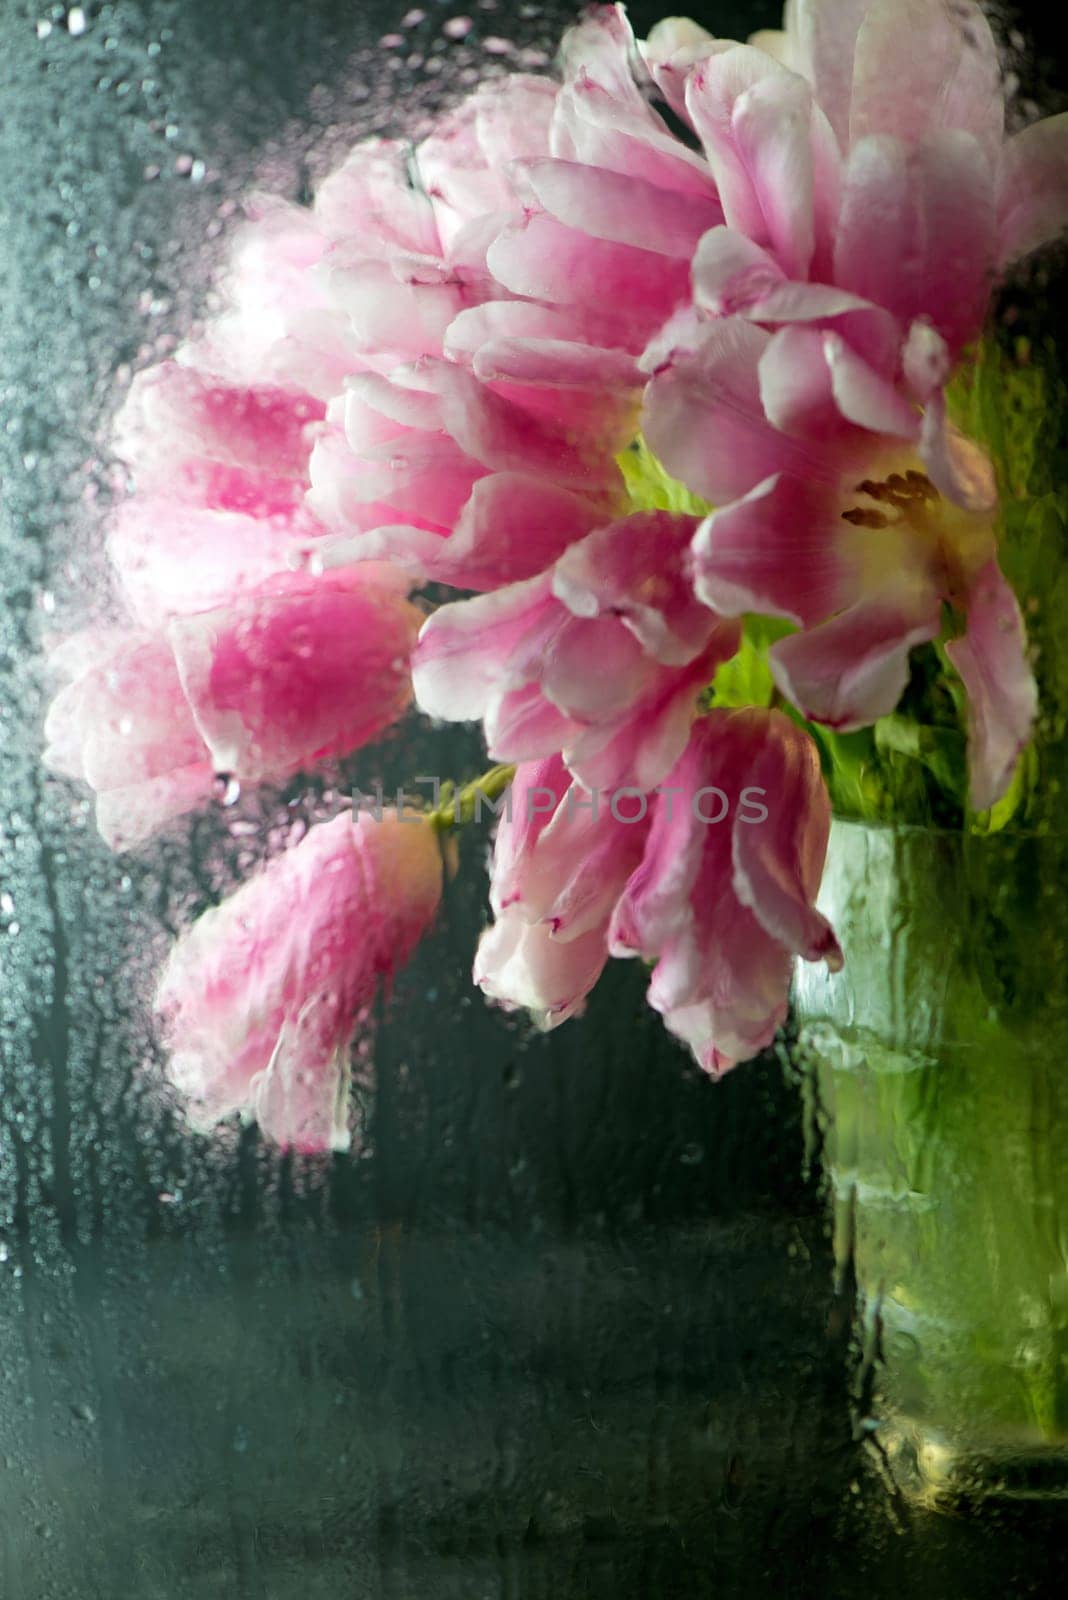 Rain outside pink tulips behind the glass window in the house by aprilphoto